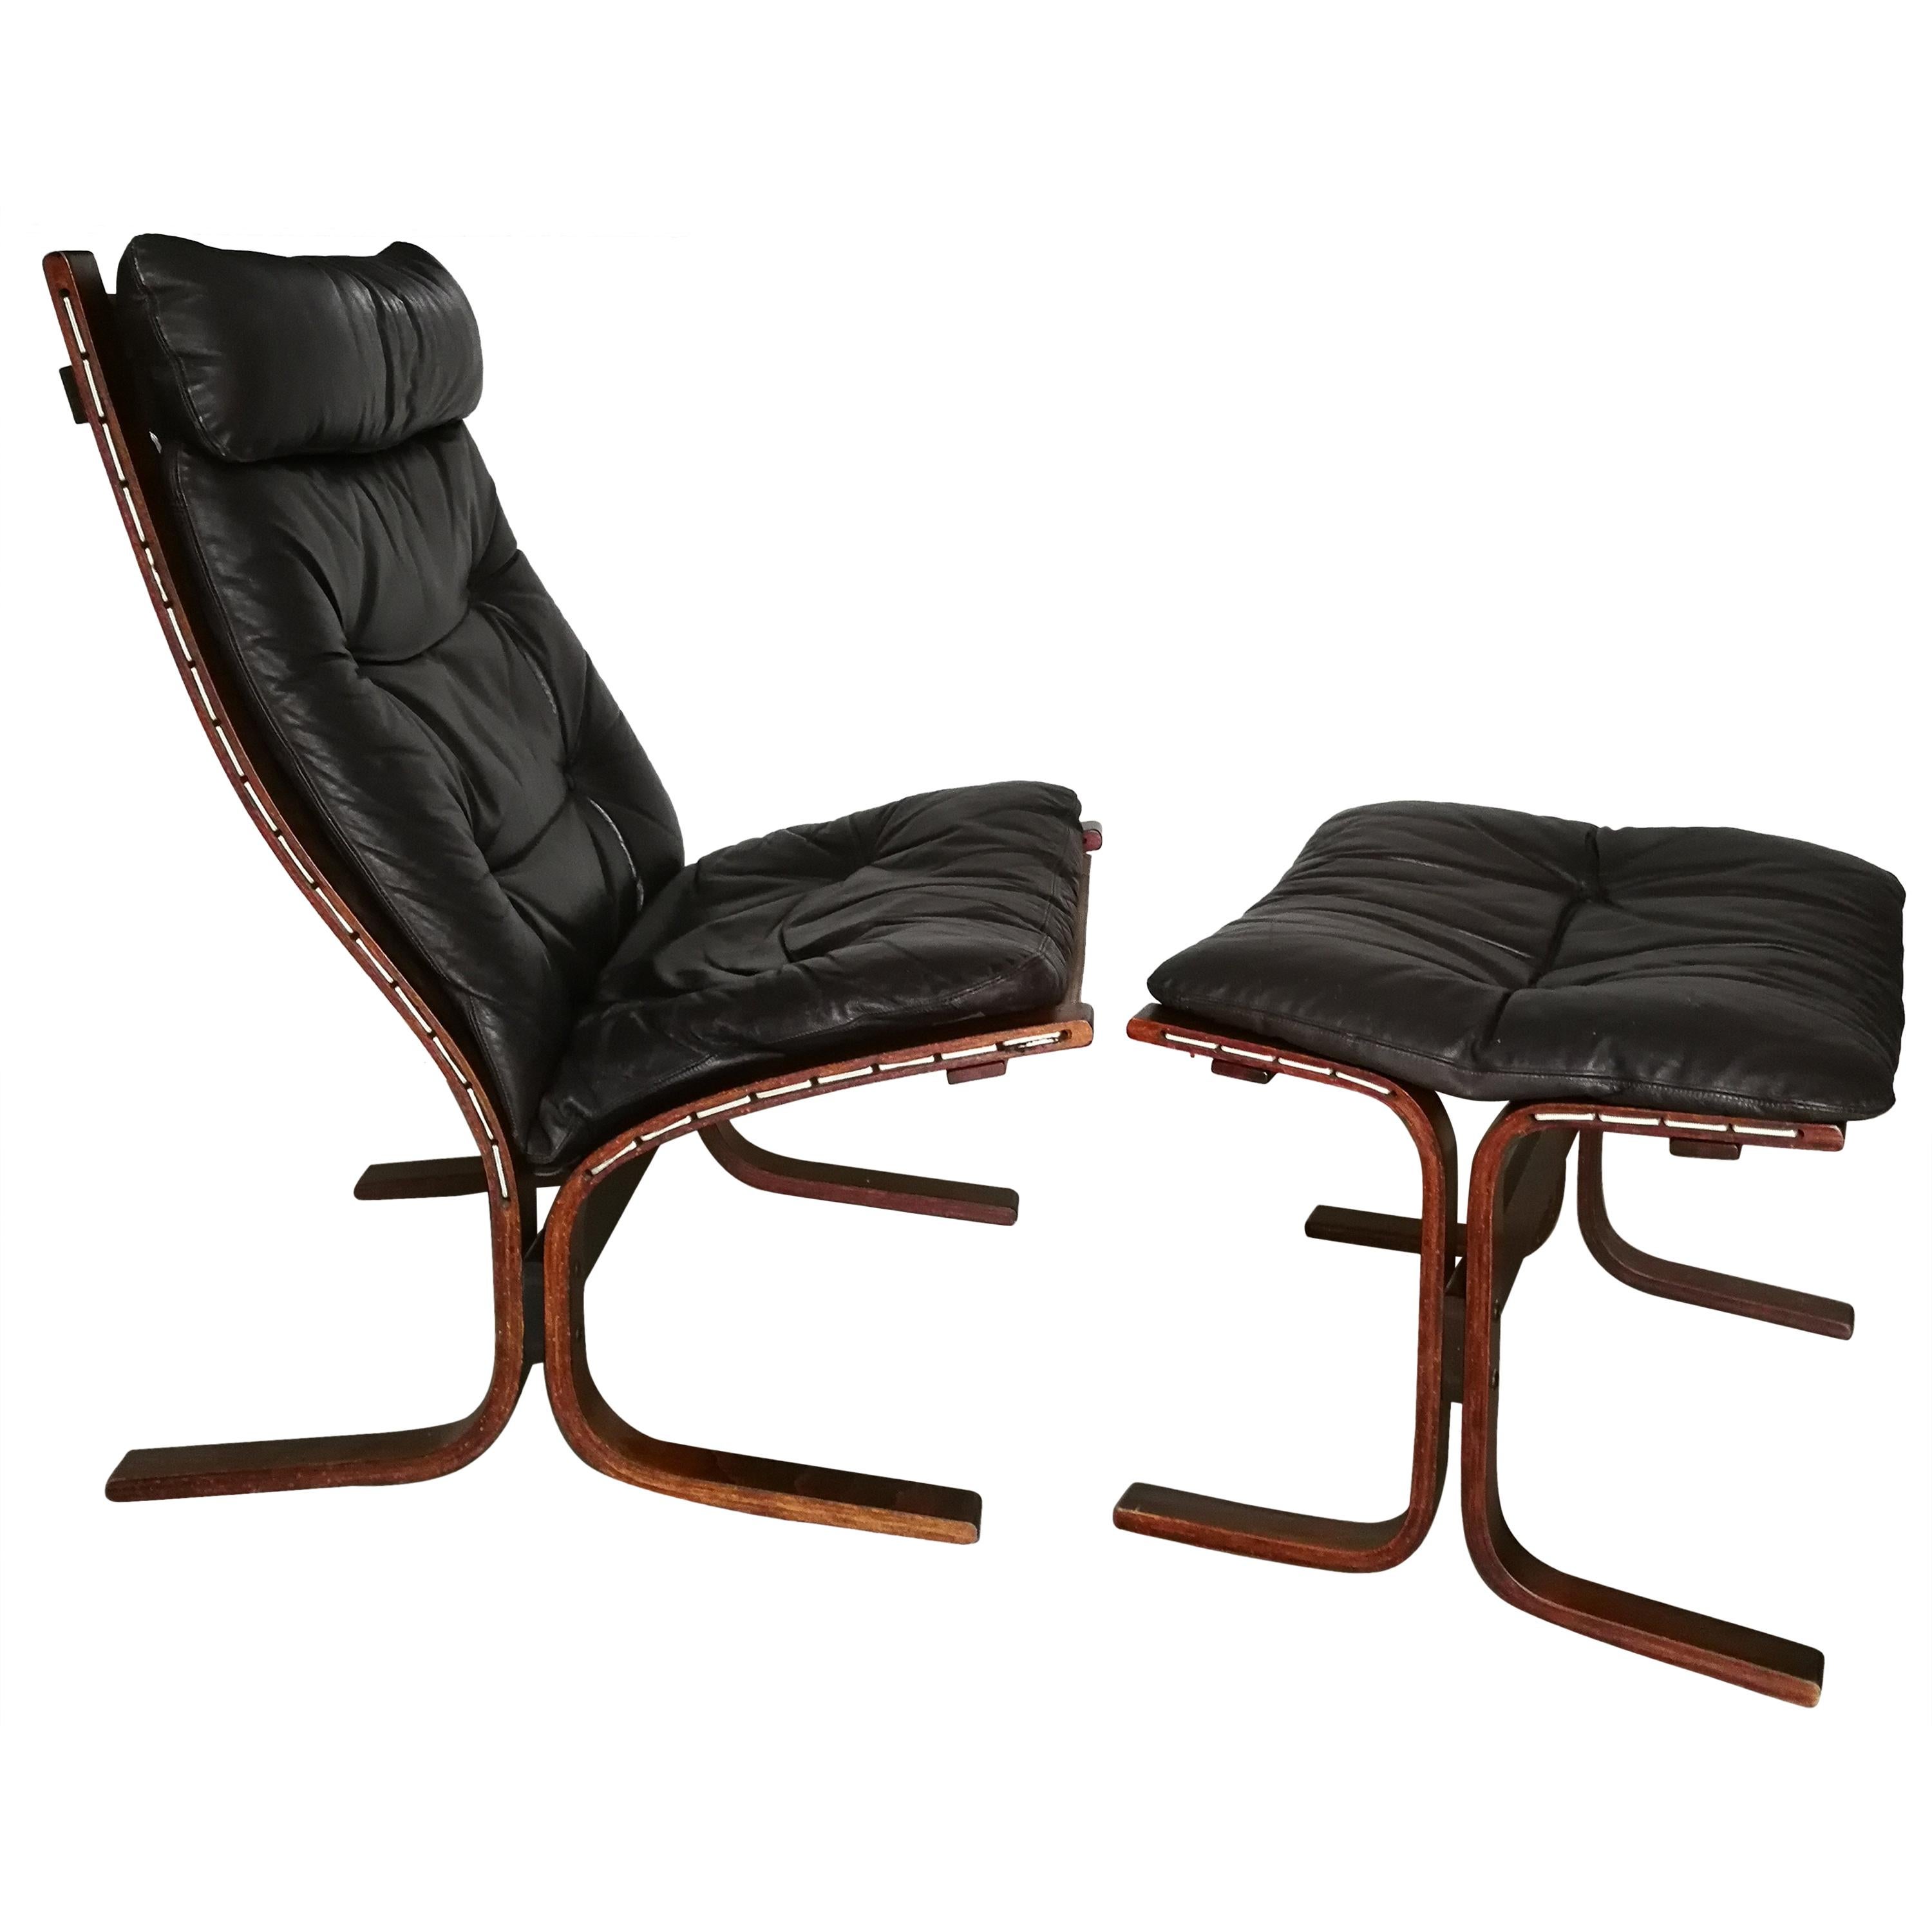 Siesta High Back Lounge Chair and Ottoman by Ingmar Relling for Westnofa